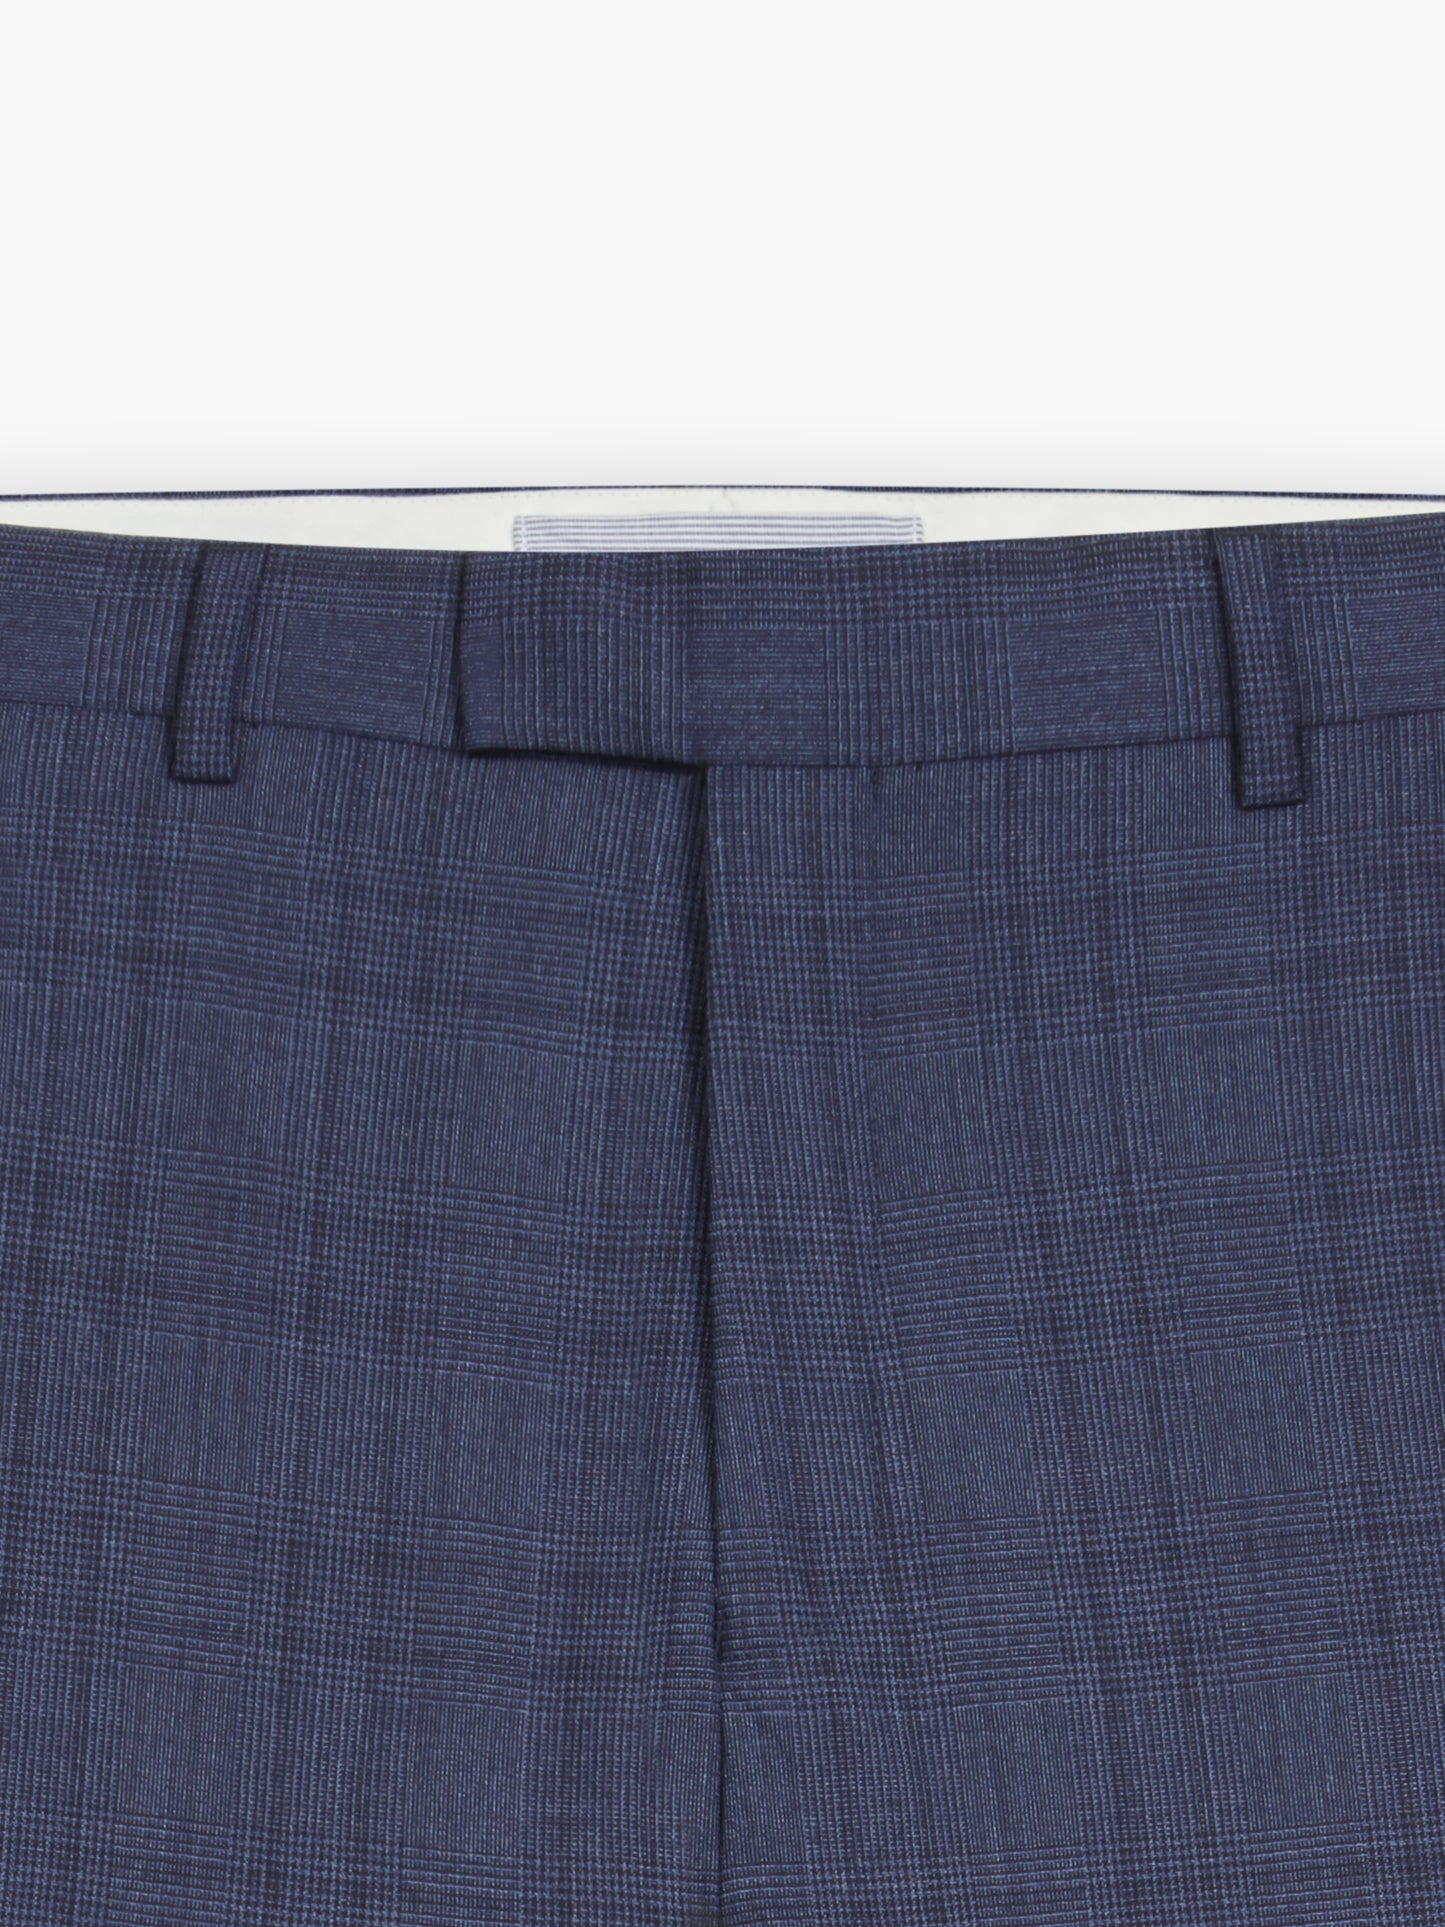 Kingaby Infinity Slim Fit Navy Blue Check Trousers